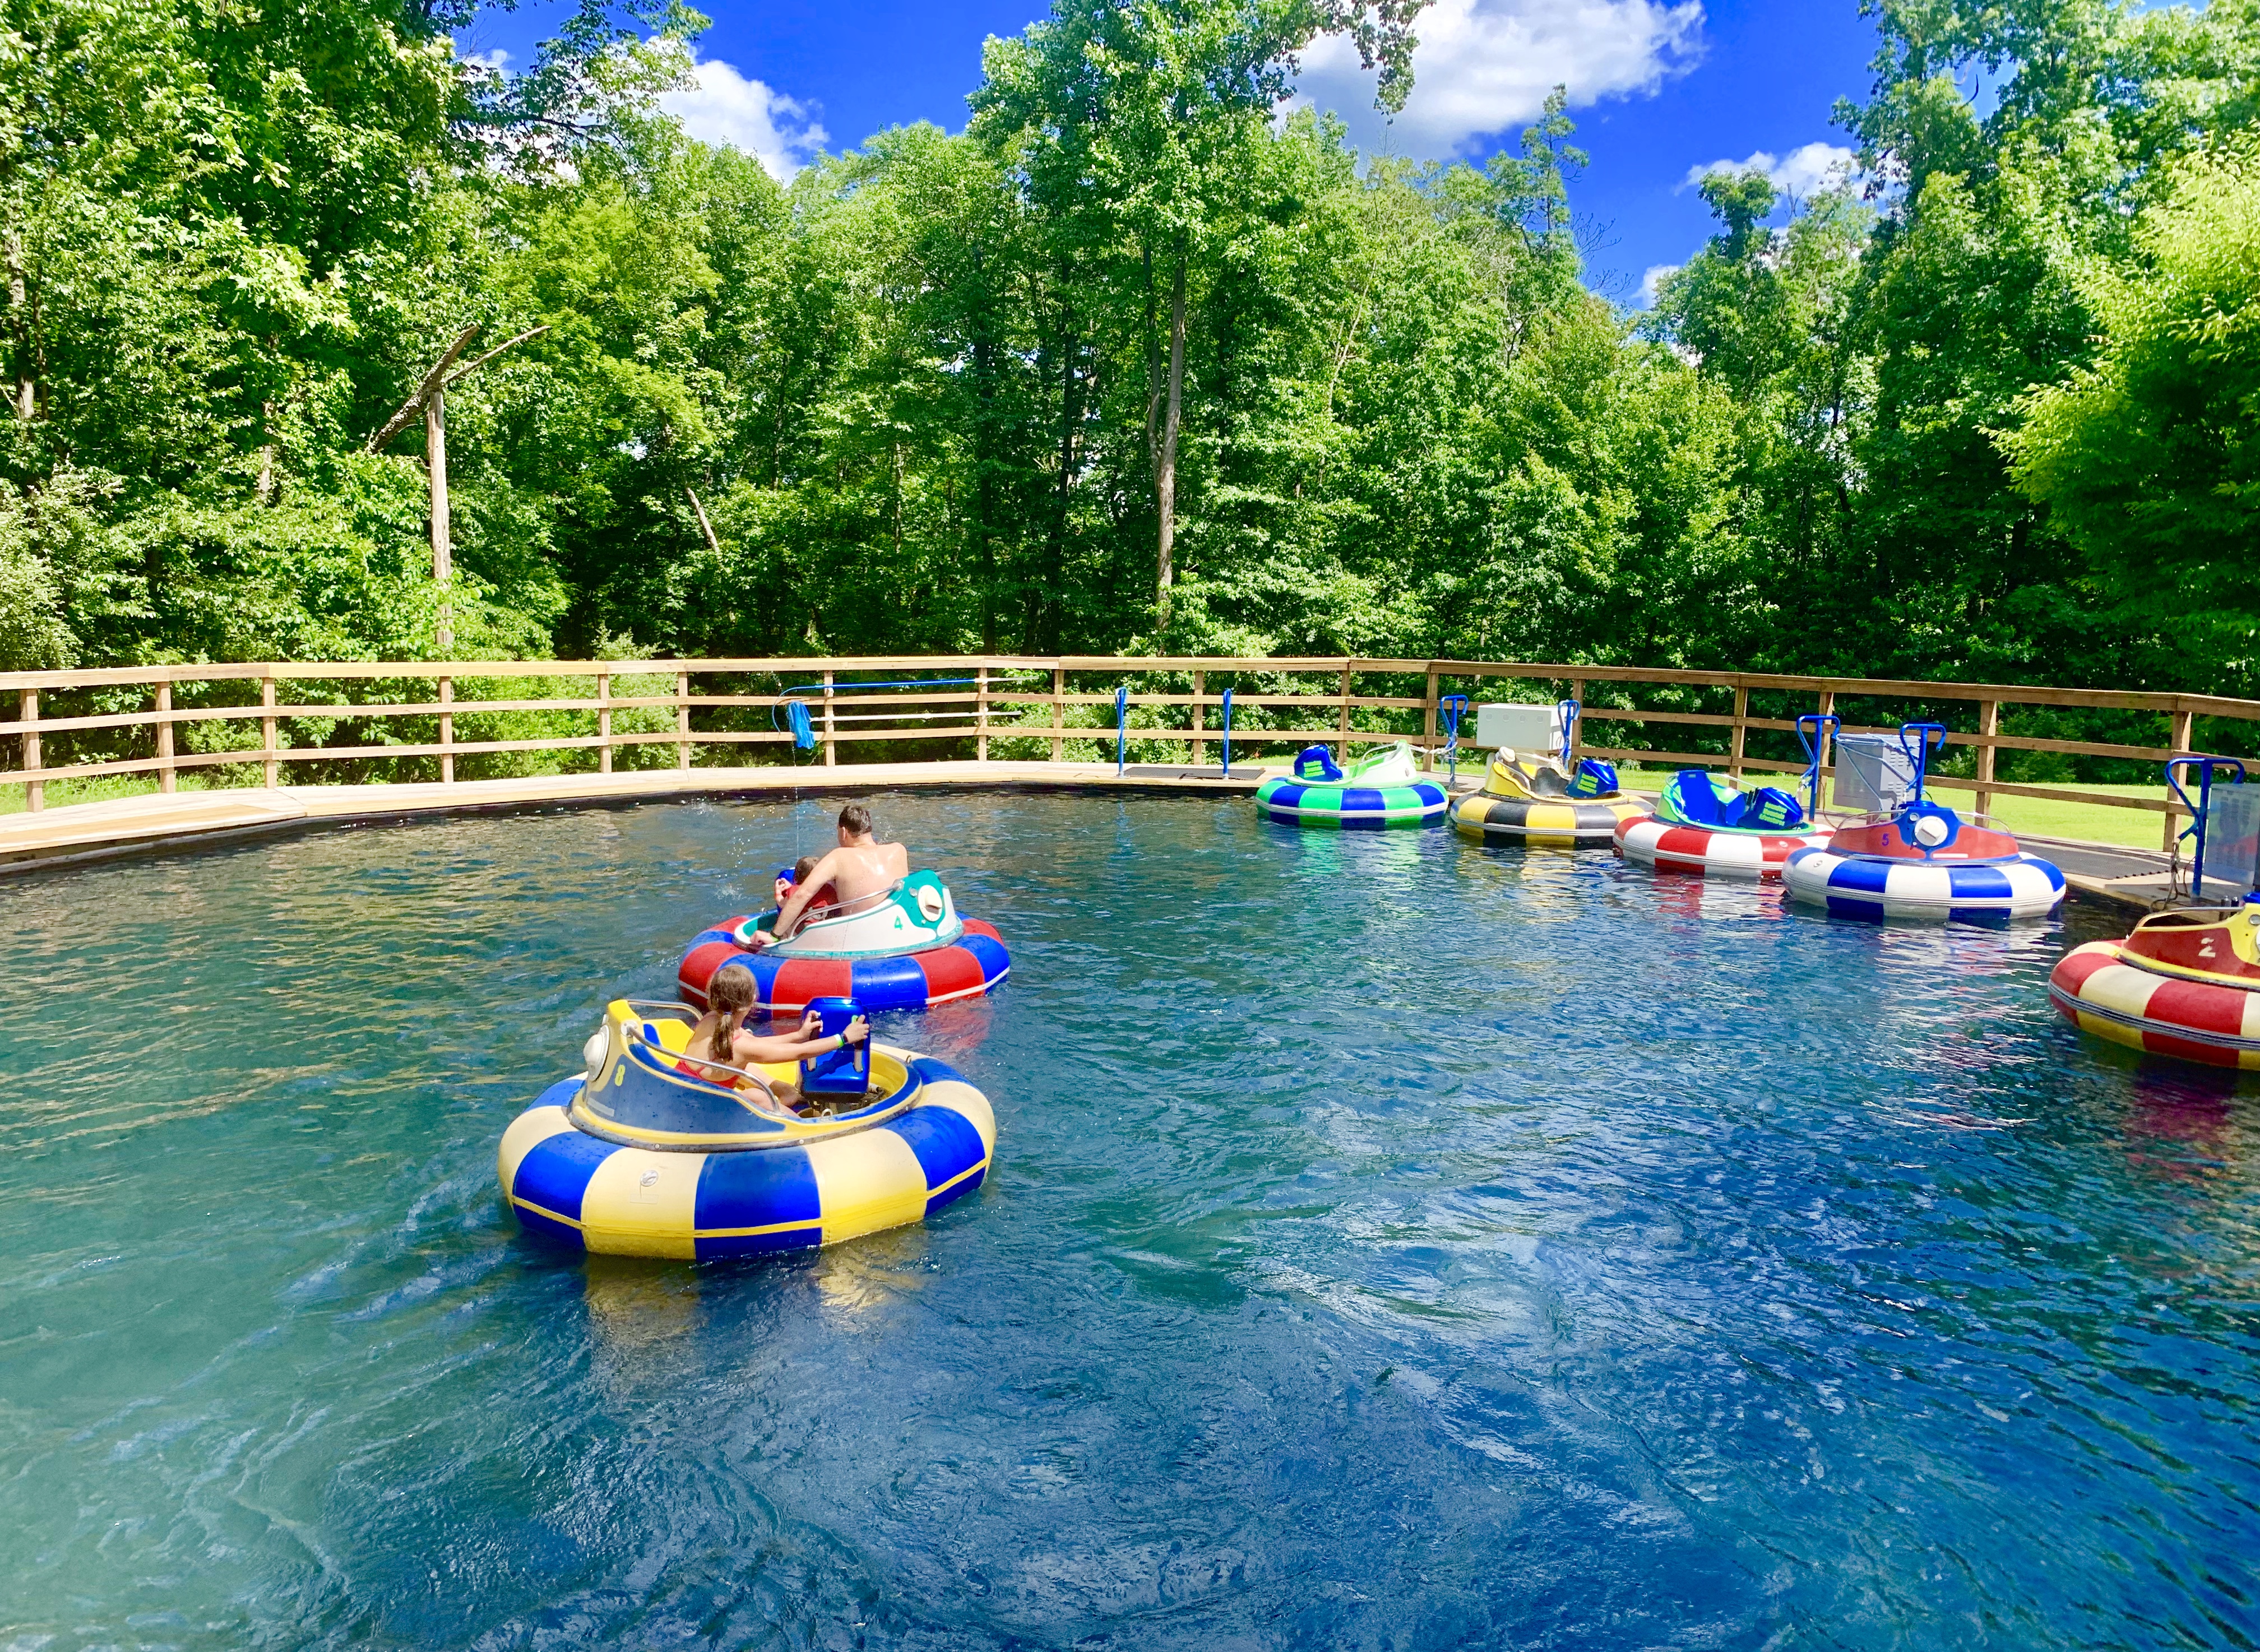 Roundtop-Bumper-Boats - Been There Done That with Kids